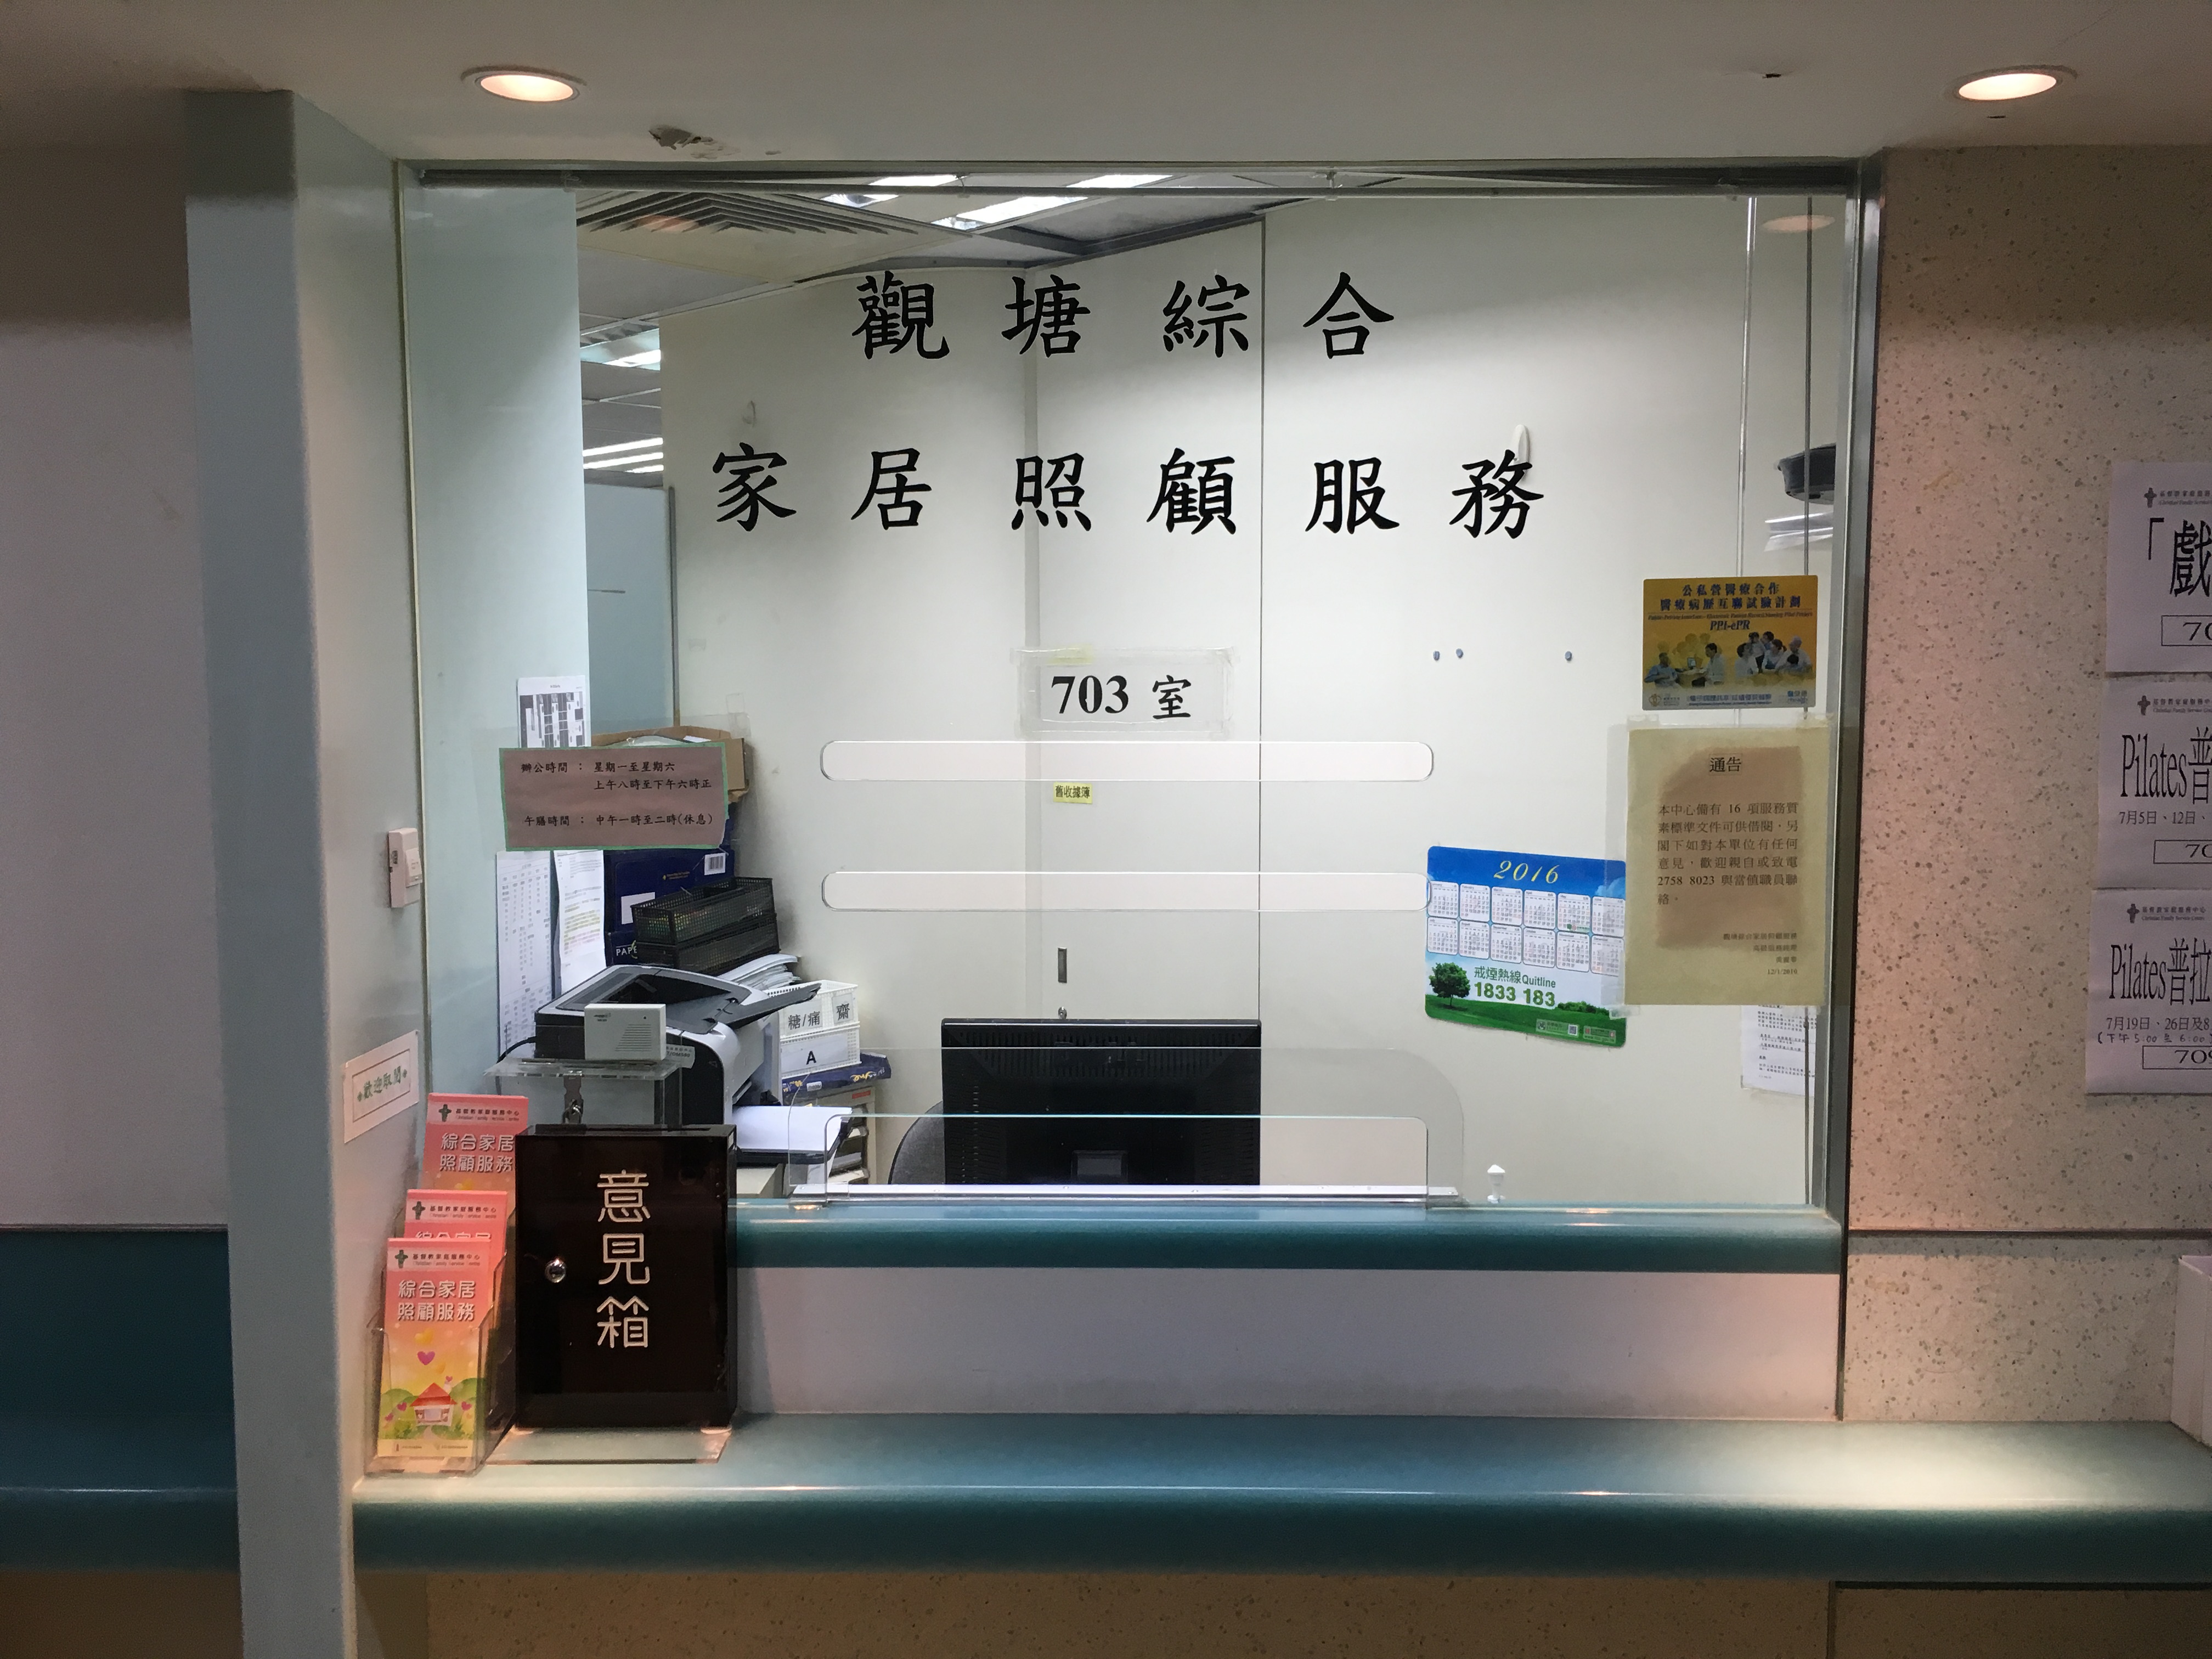 Kwun Tong Enhanced Home and Community Care Services Office Environment Photo